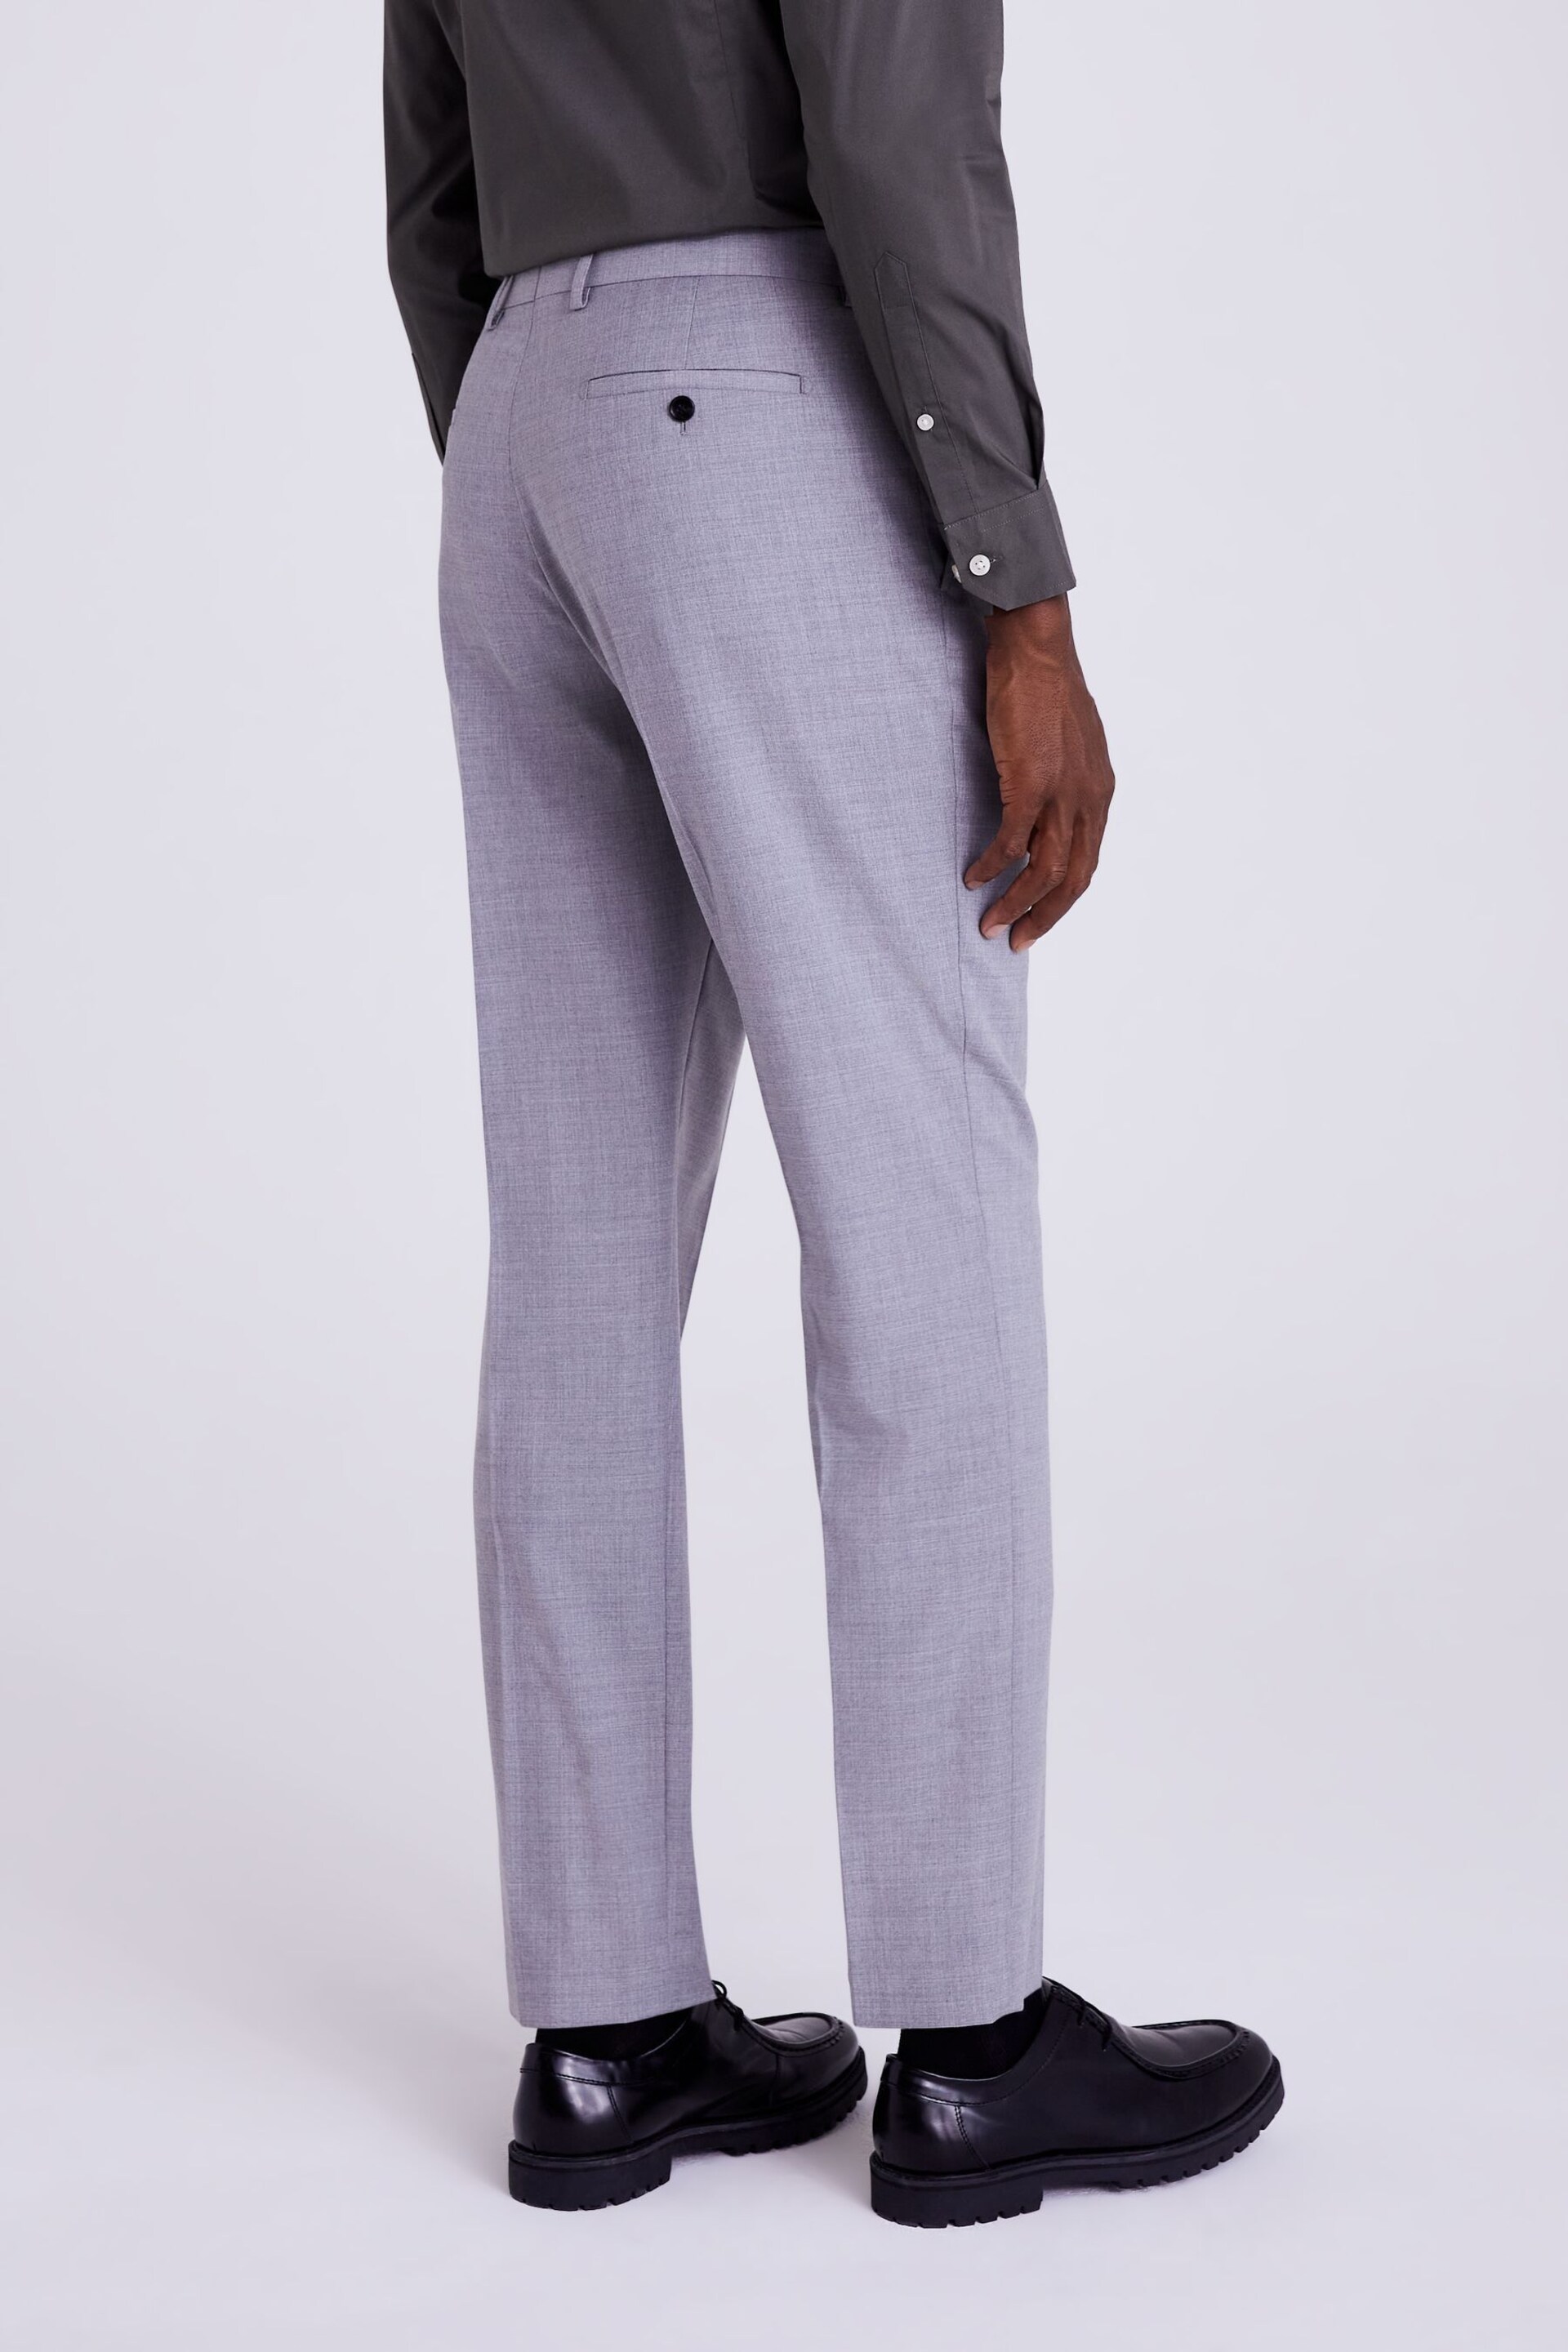 MOSS Grey Tailored Stretch Suit: Trousers - Image 2 of 3